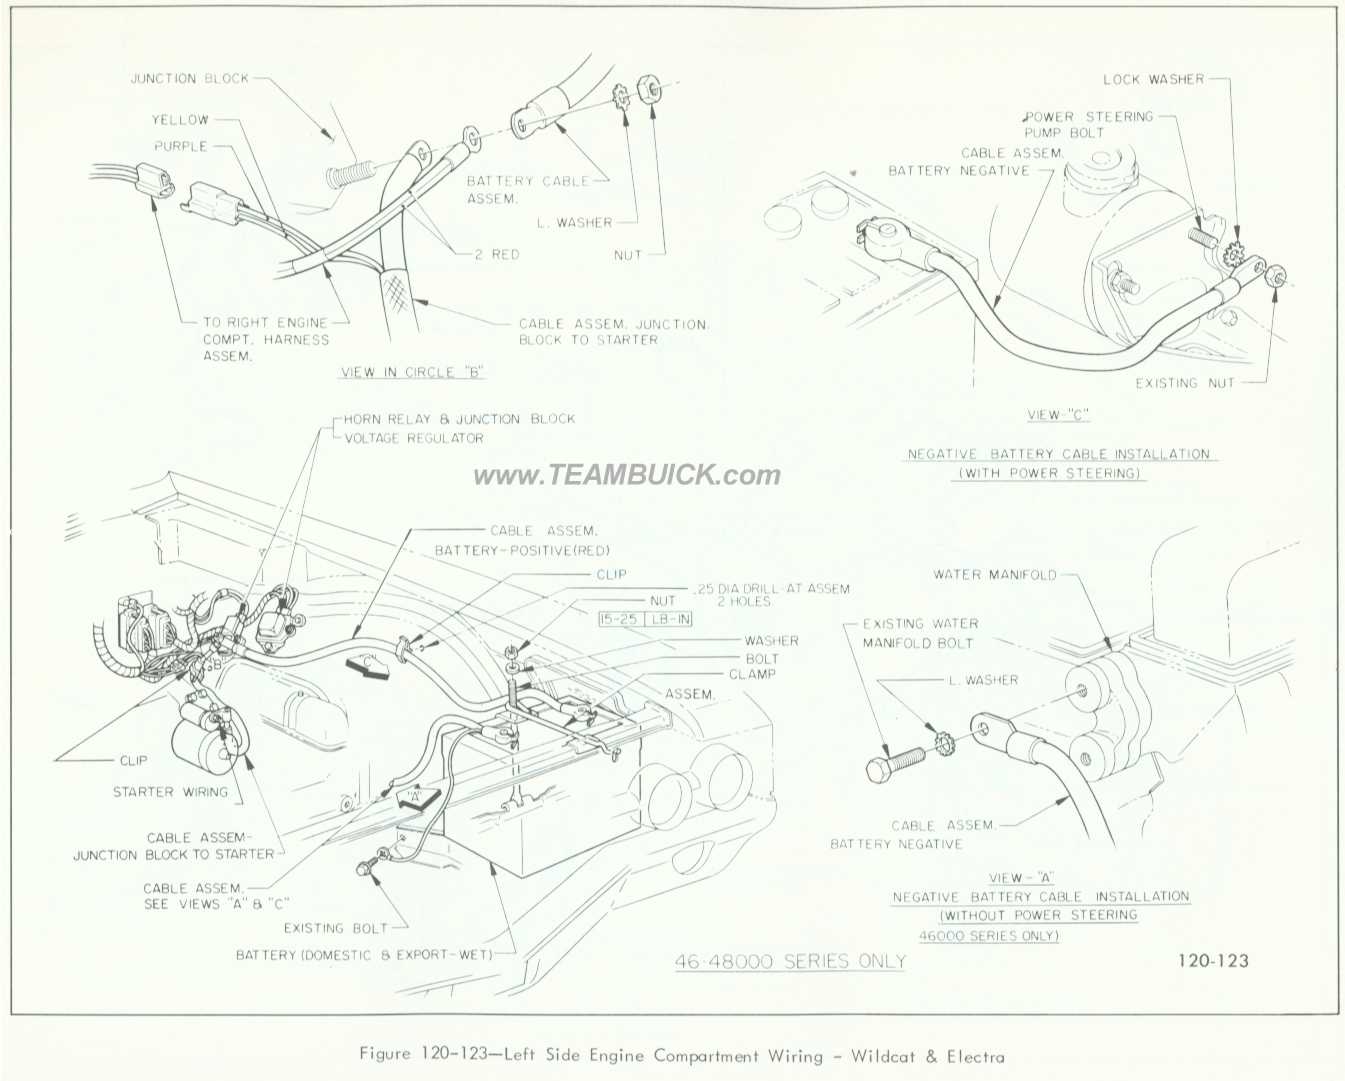 1966 Buick Wildcat, Electra, Left Side Engine Compartment Wiring